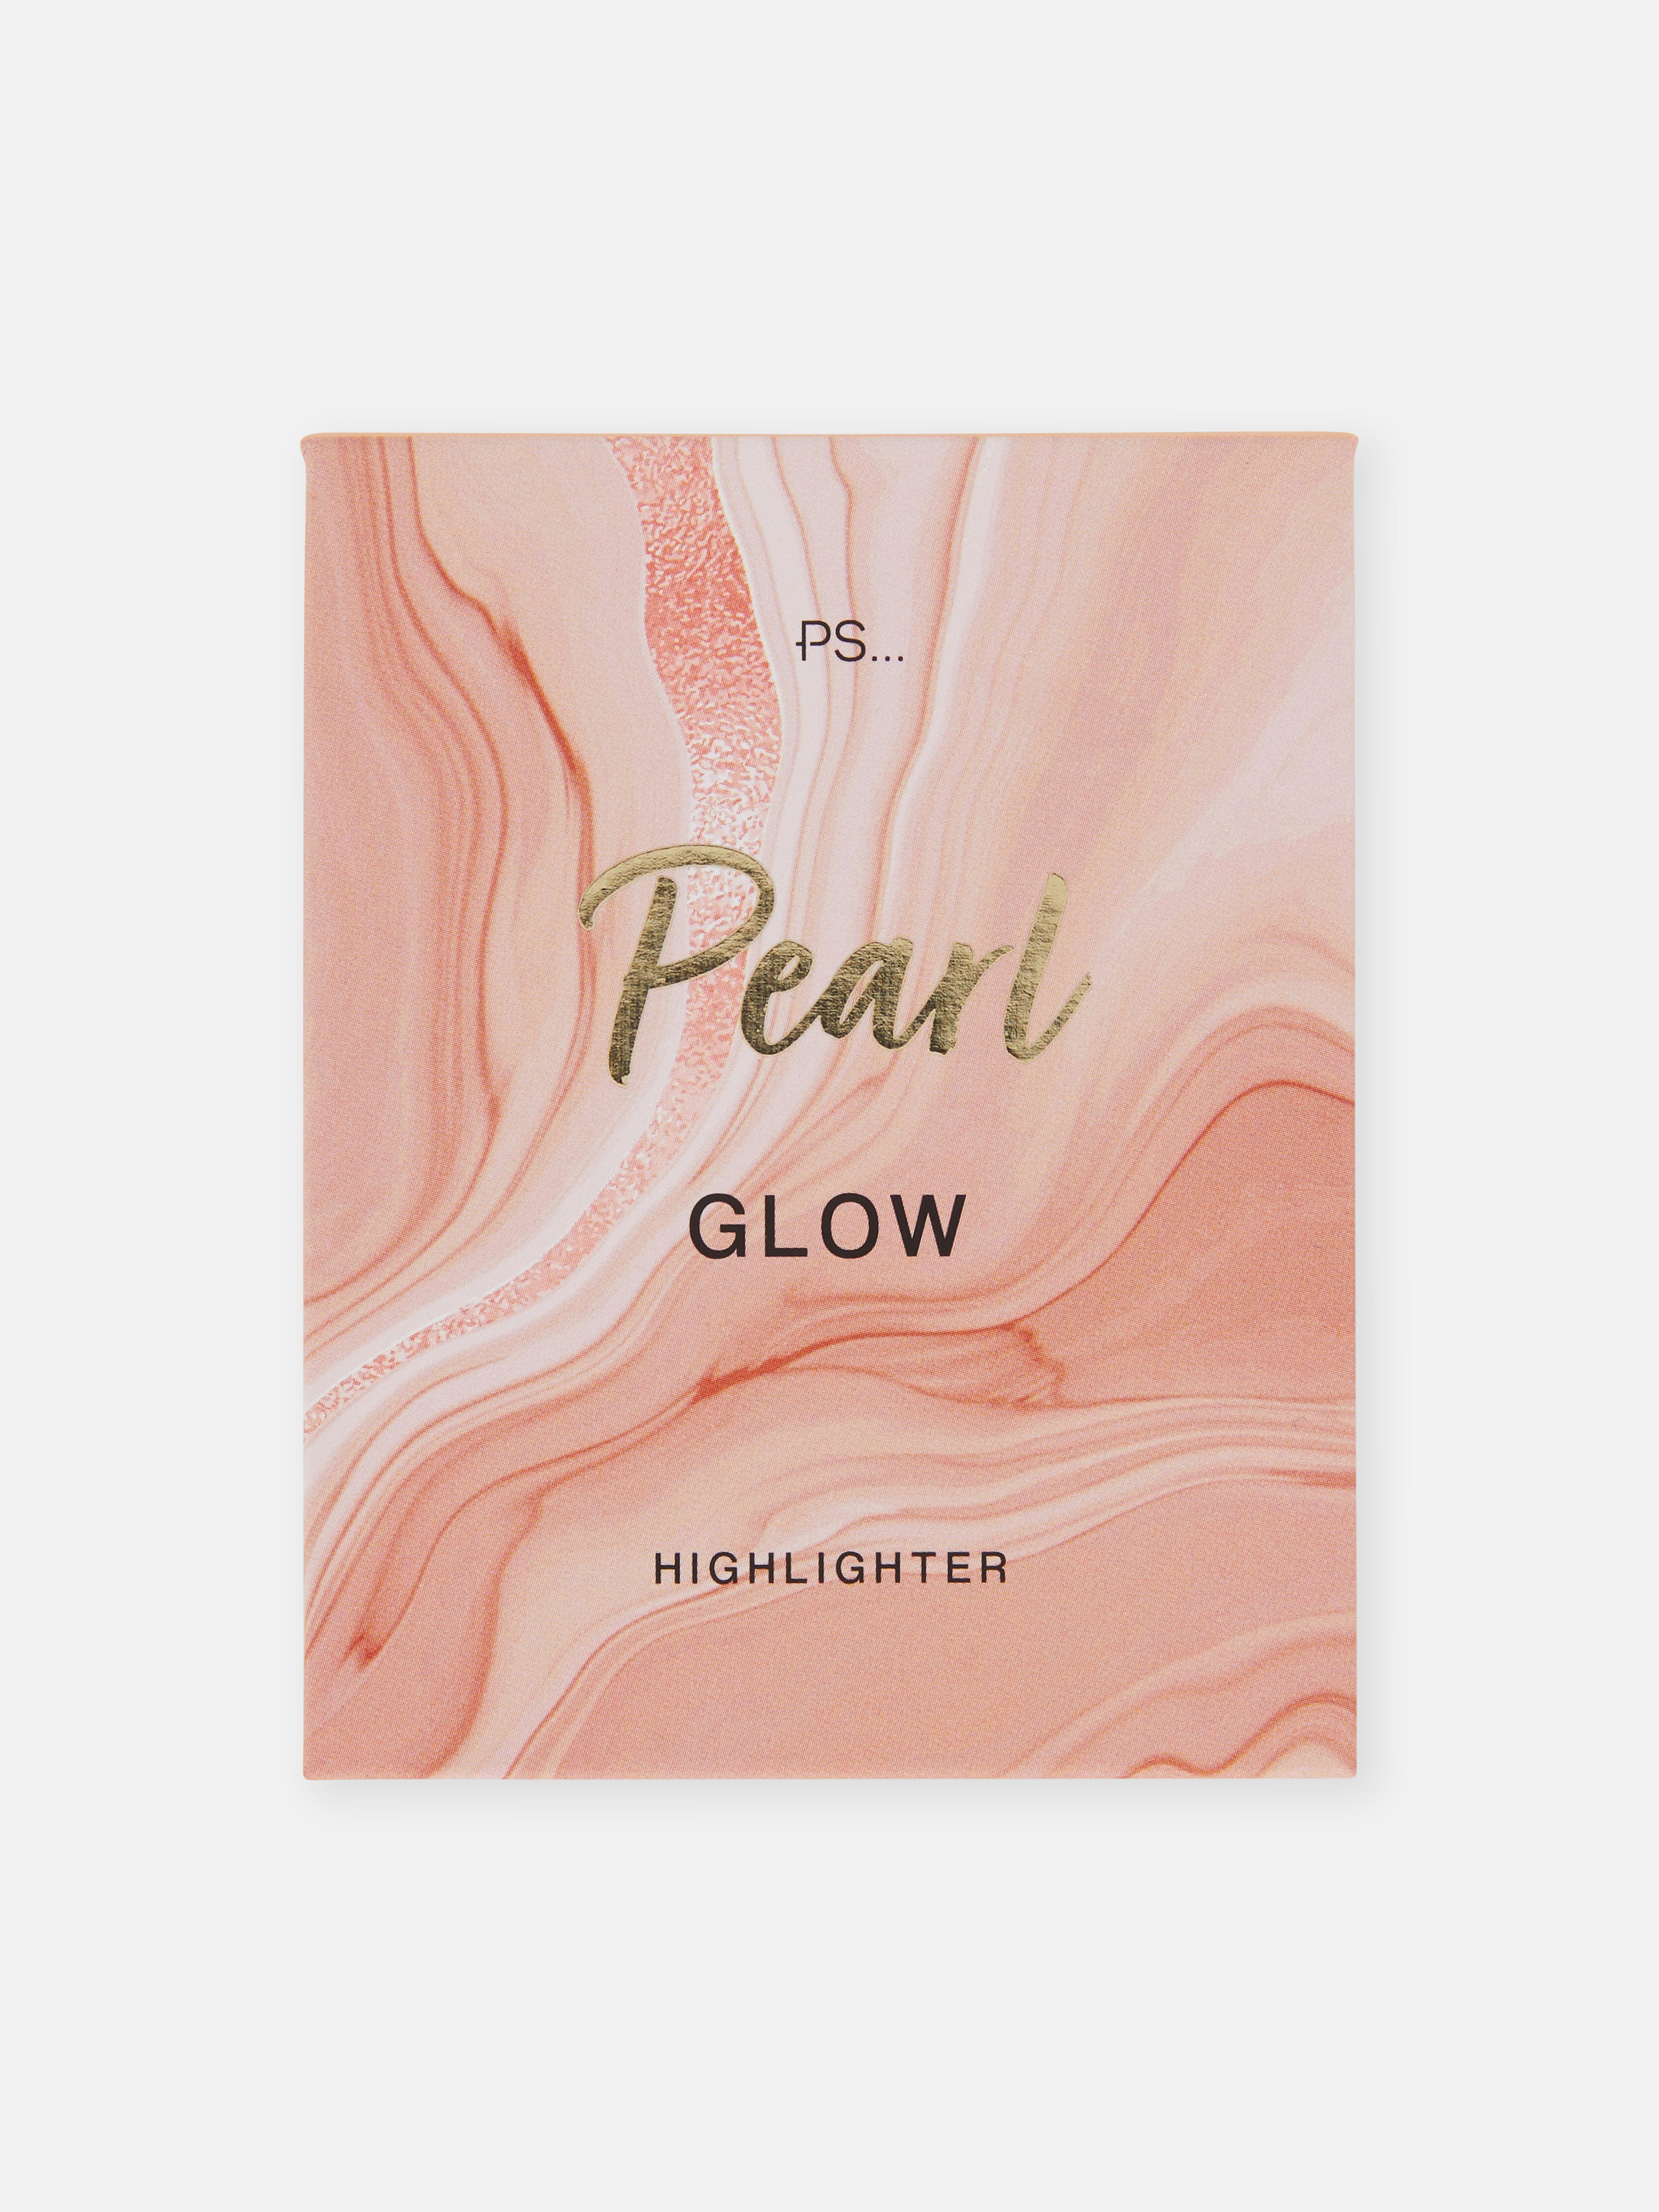 PS... Single Glow Highlighter